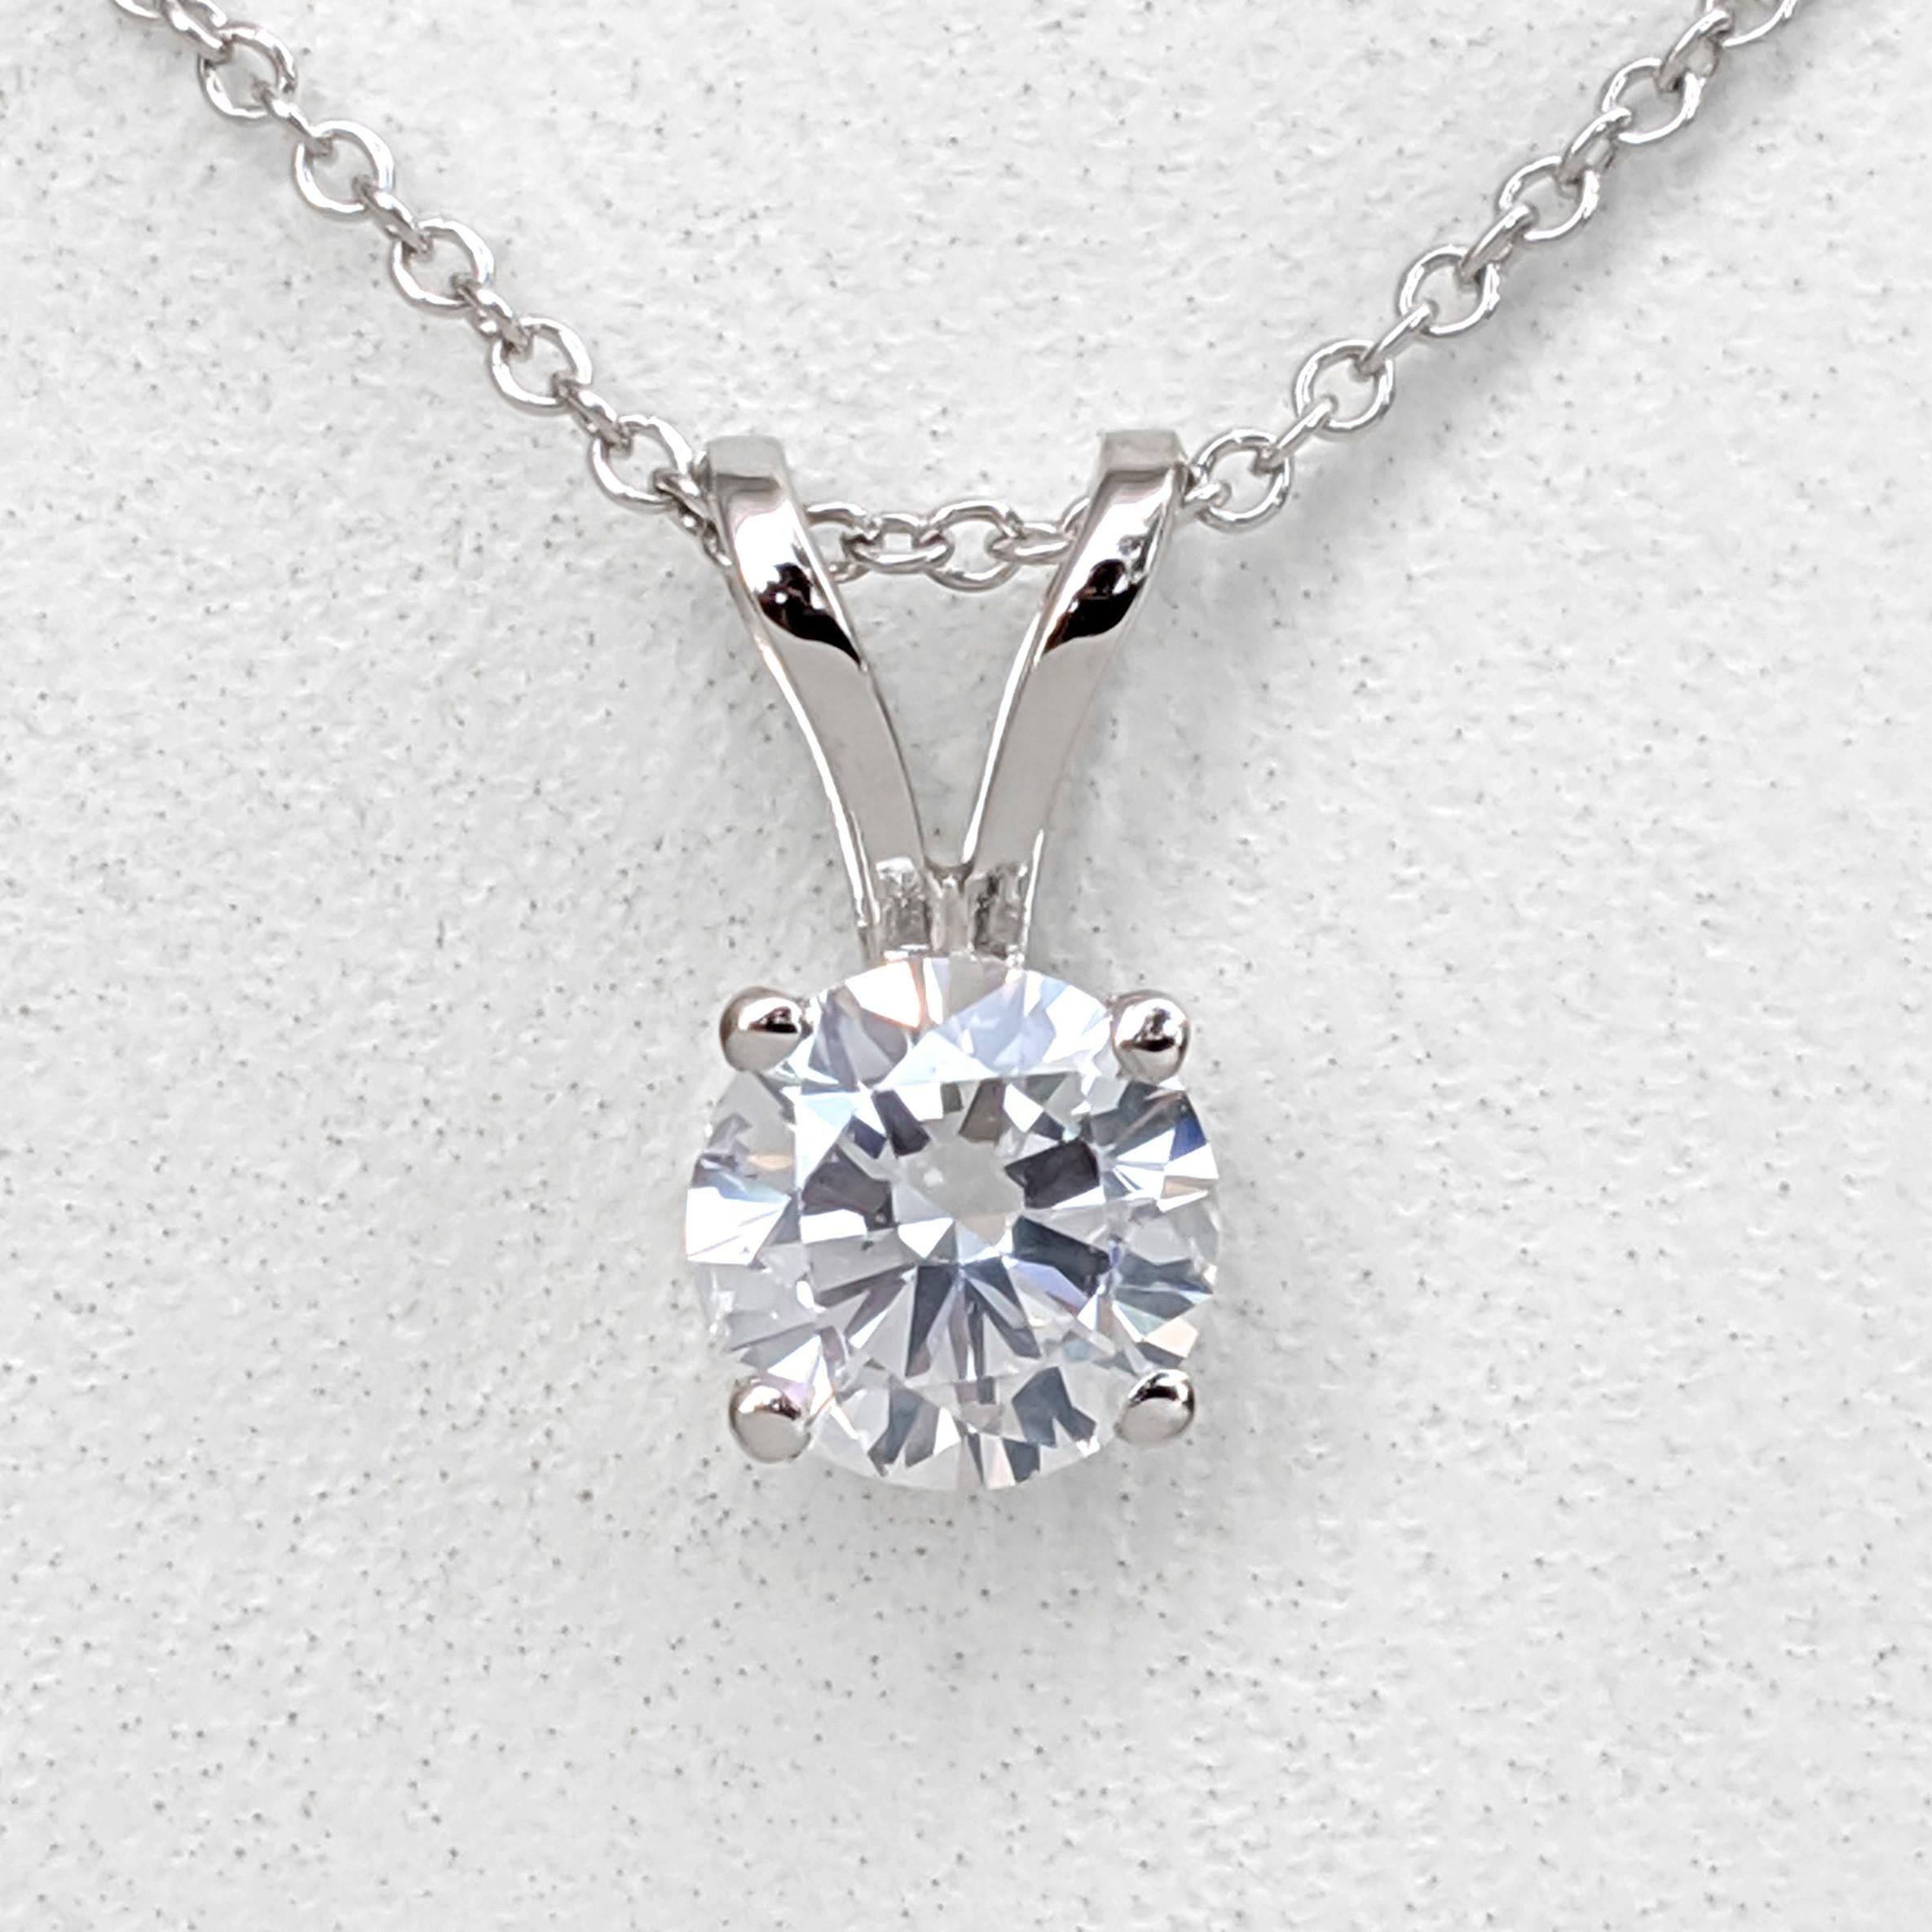 Round Cut NO RESERVE! 0.60 Carat Diamond - 14 kt. White gold - Necklace with pendant